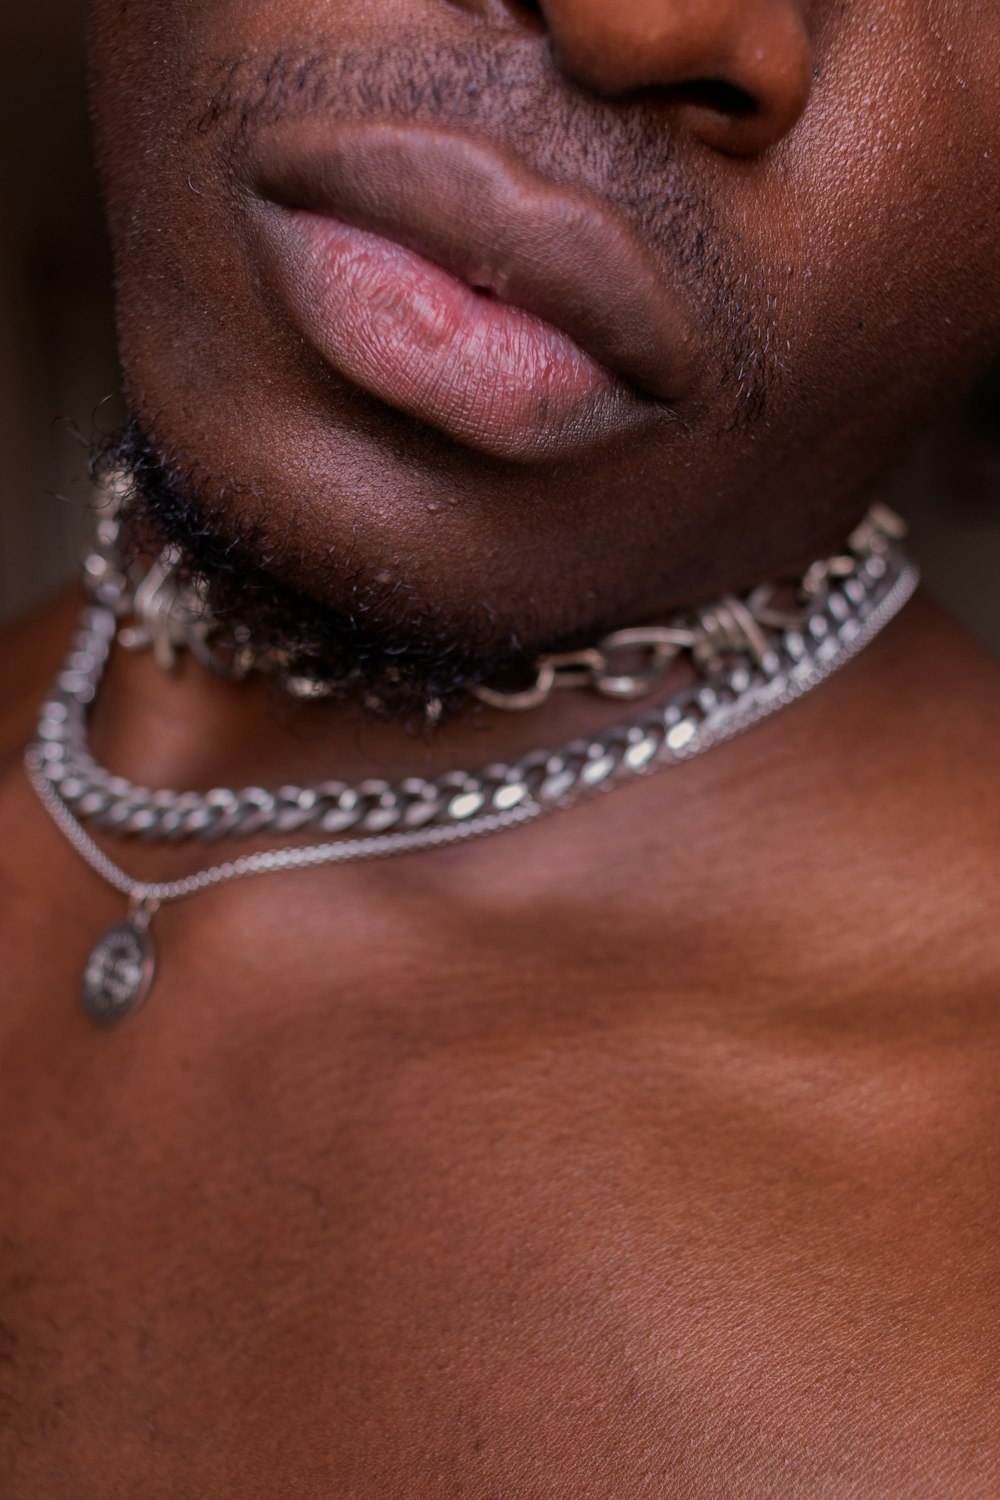 a close up of a man wearing a chain around his neck